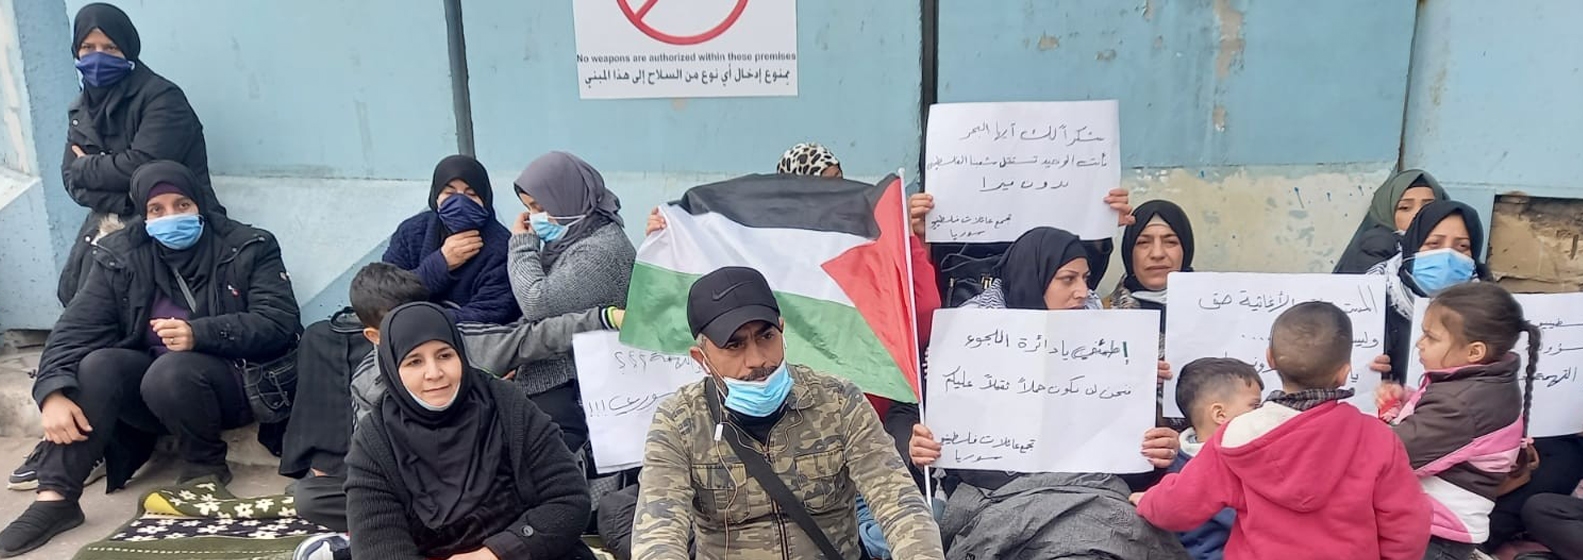 Why did the Palestinian refugees from Syria set up a sit-in tent in front of the UNRWA office in Beirut?